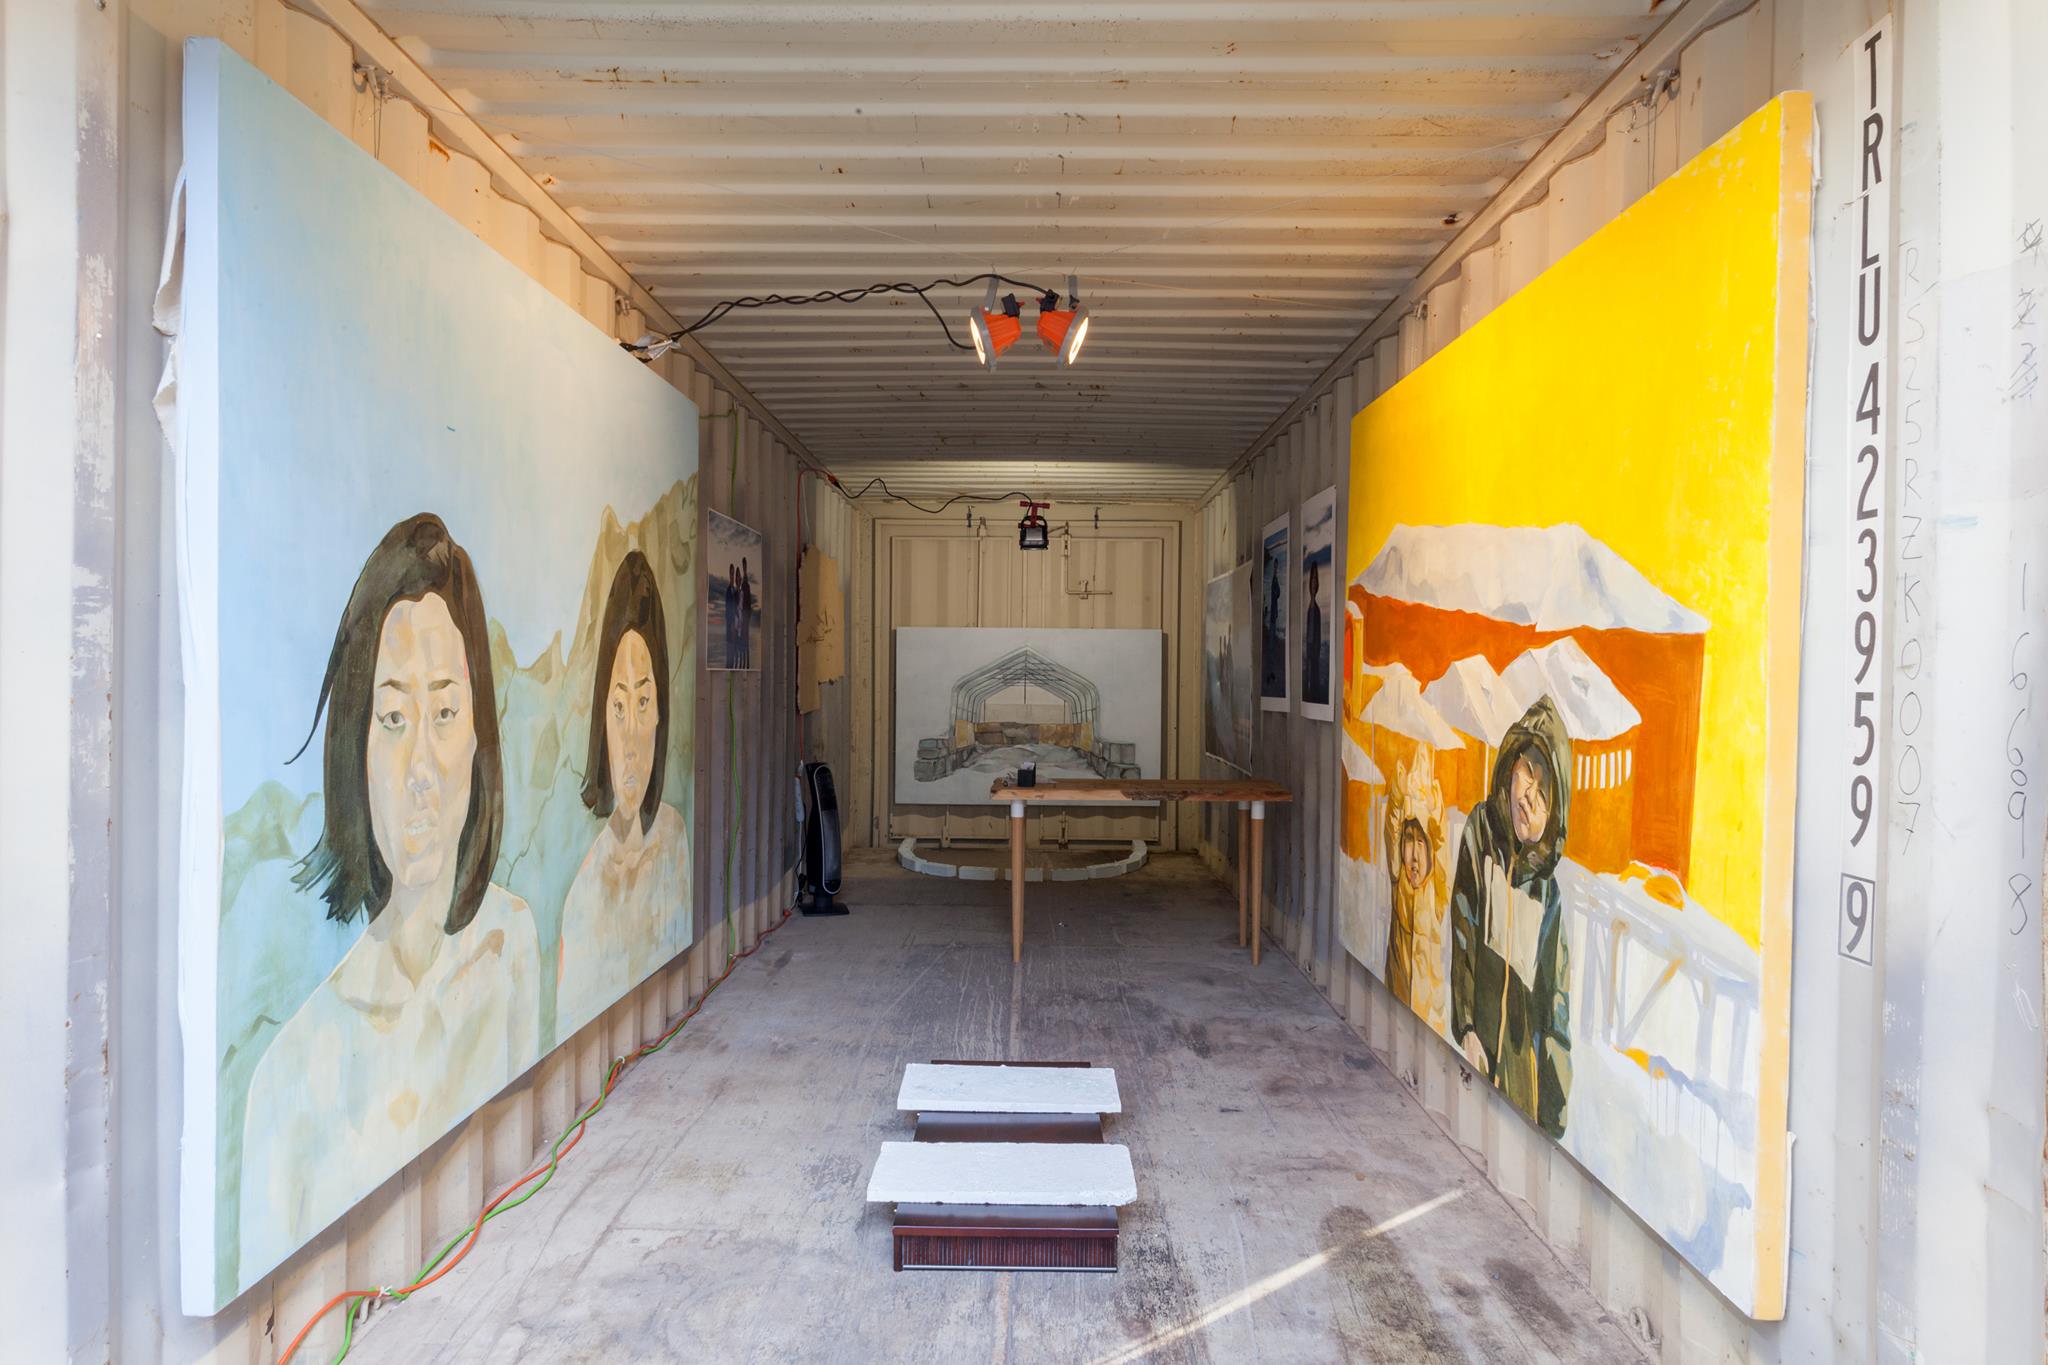 Installation view of Everyday is a Lifetime, a solo show inside a shipping container, 2017